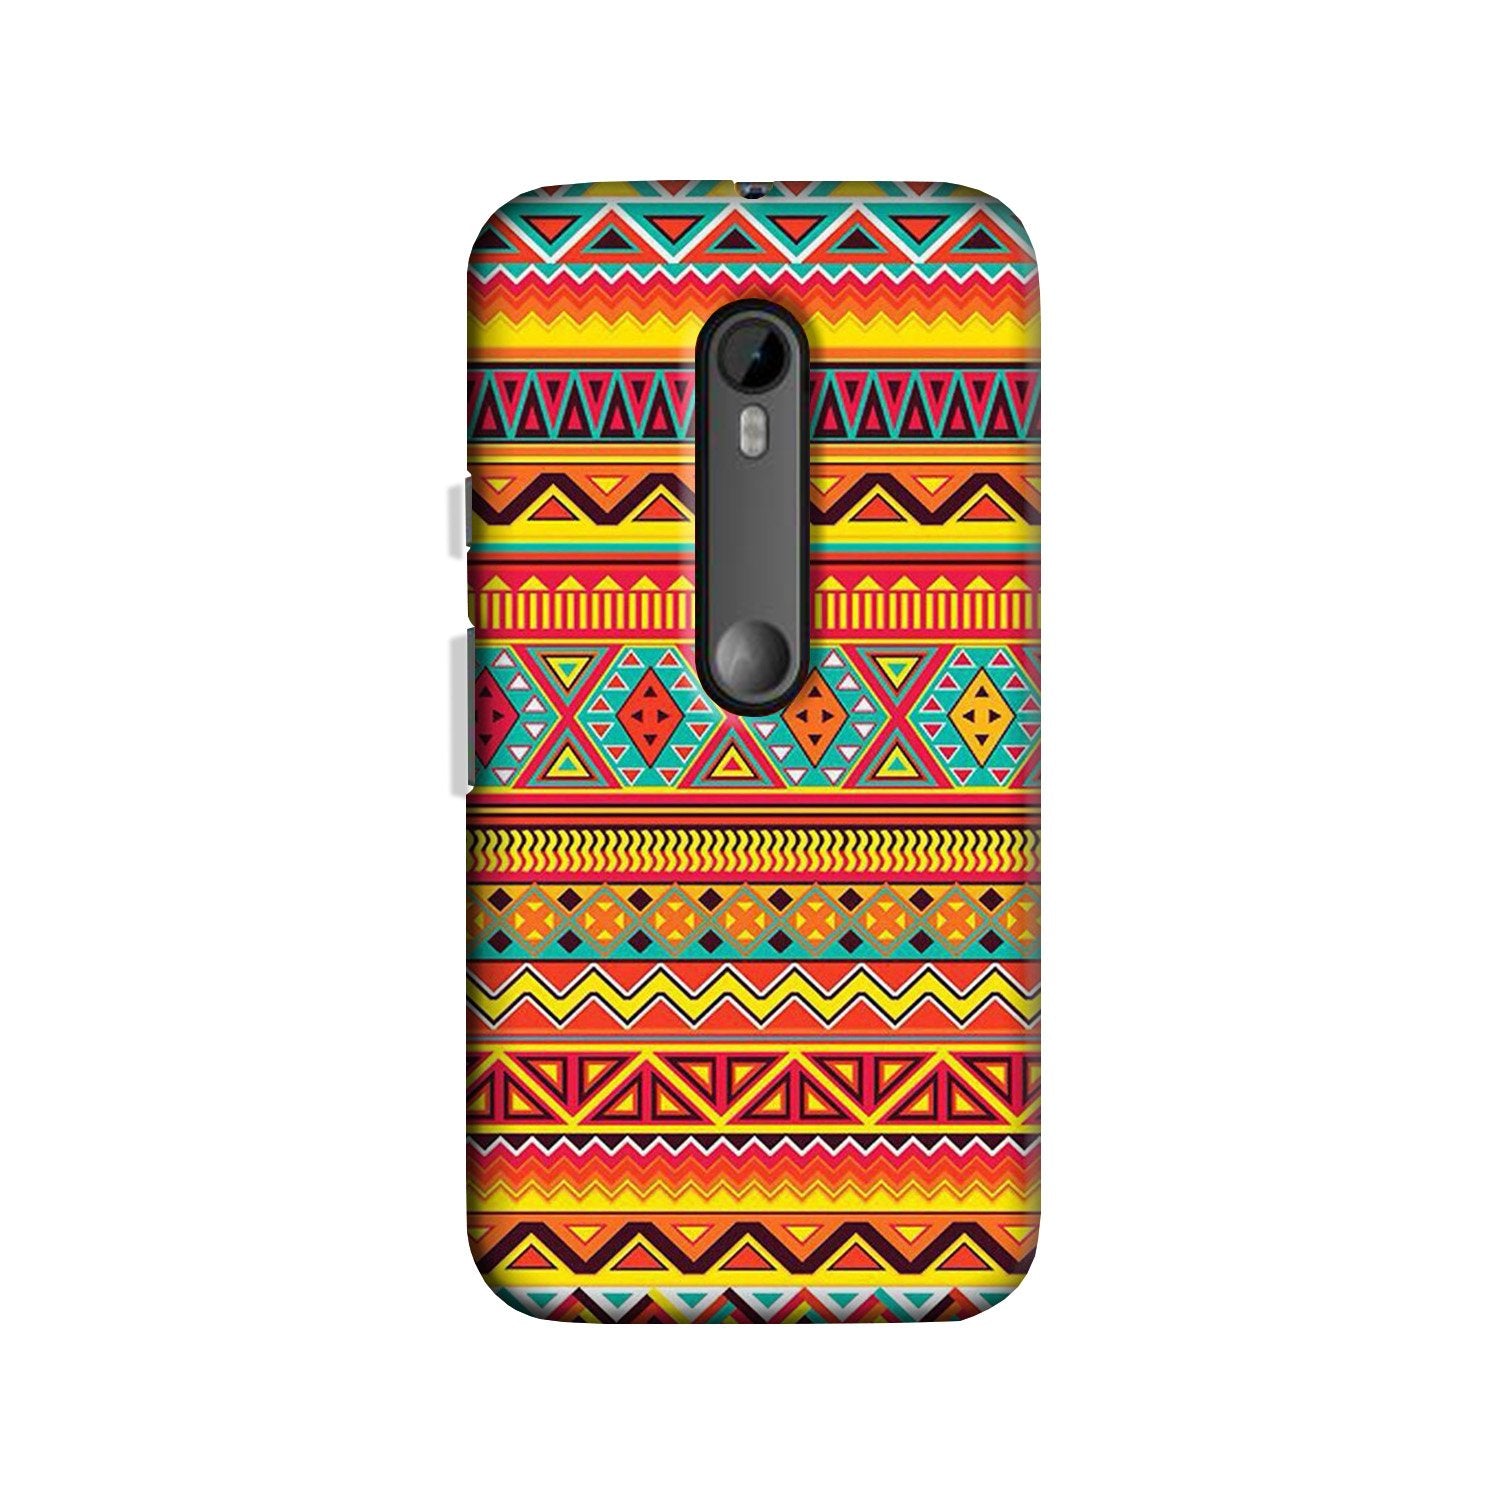 Zigzag line pattern Case for Moto X Style